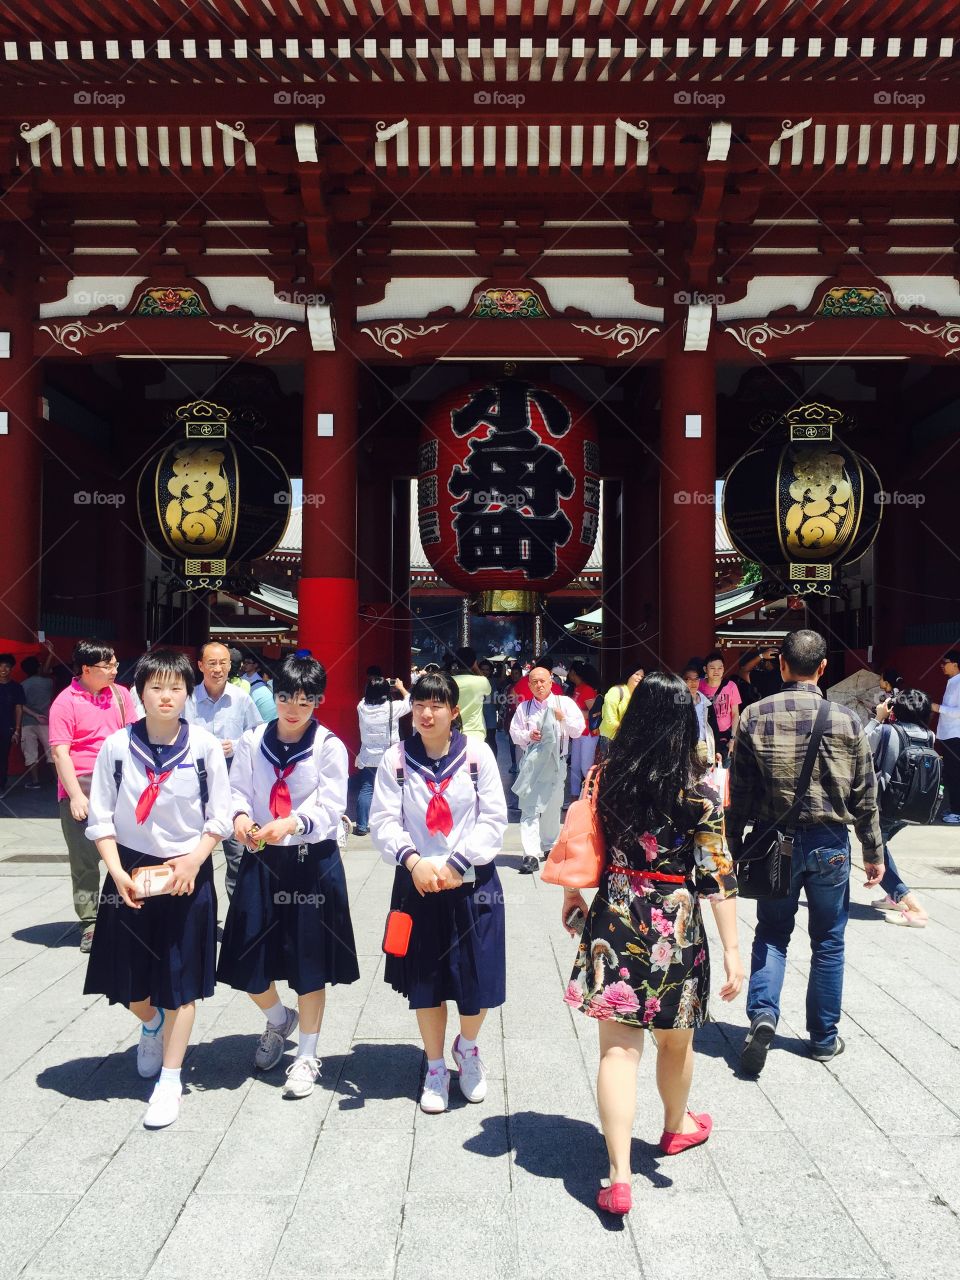 School Girls in Osakusa . Snapped whilst visiting Japan in May 2015